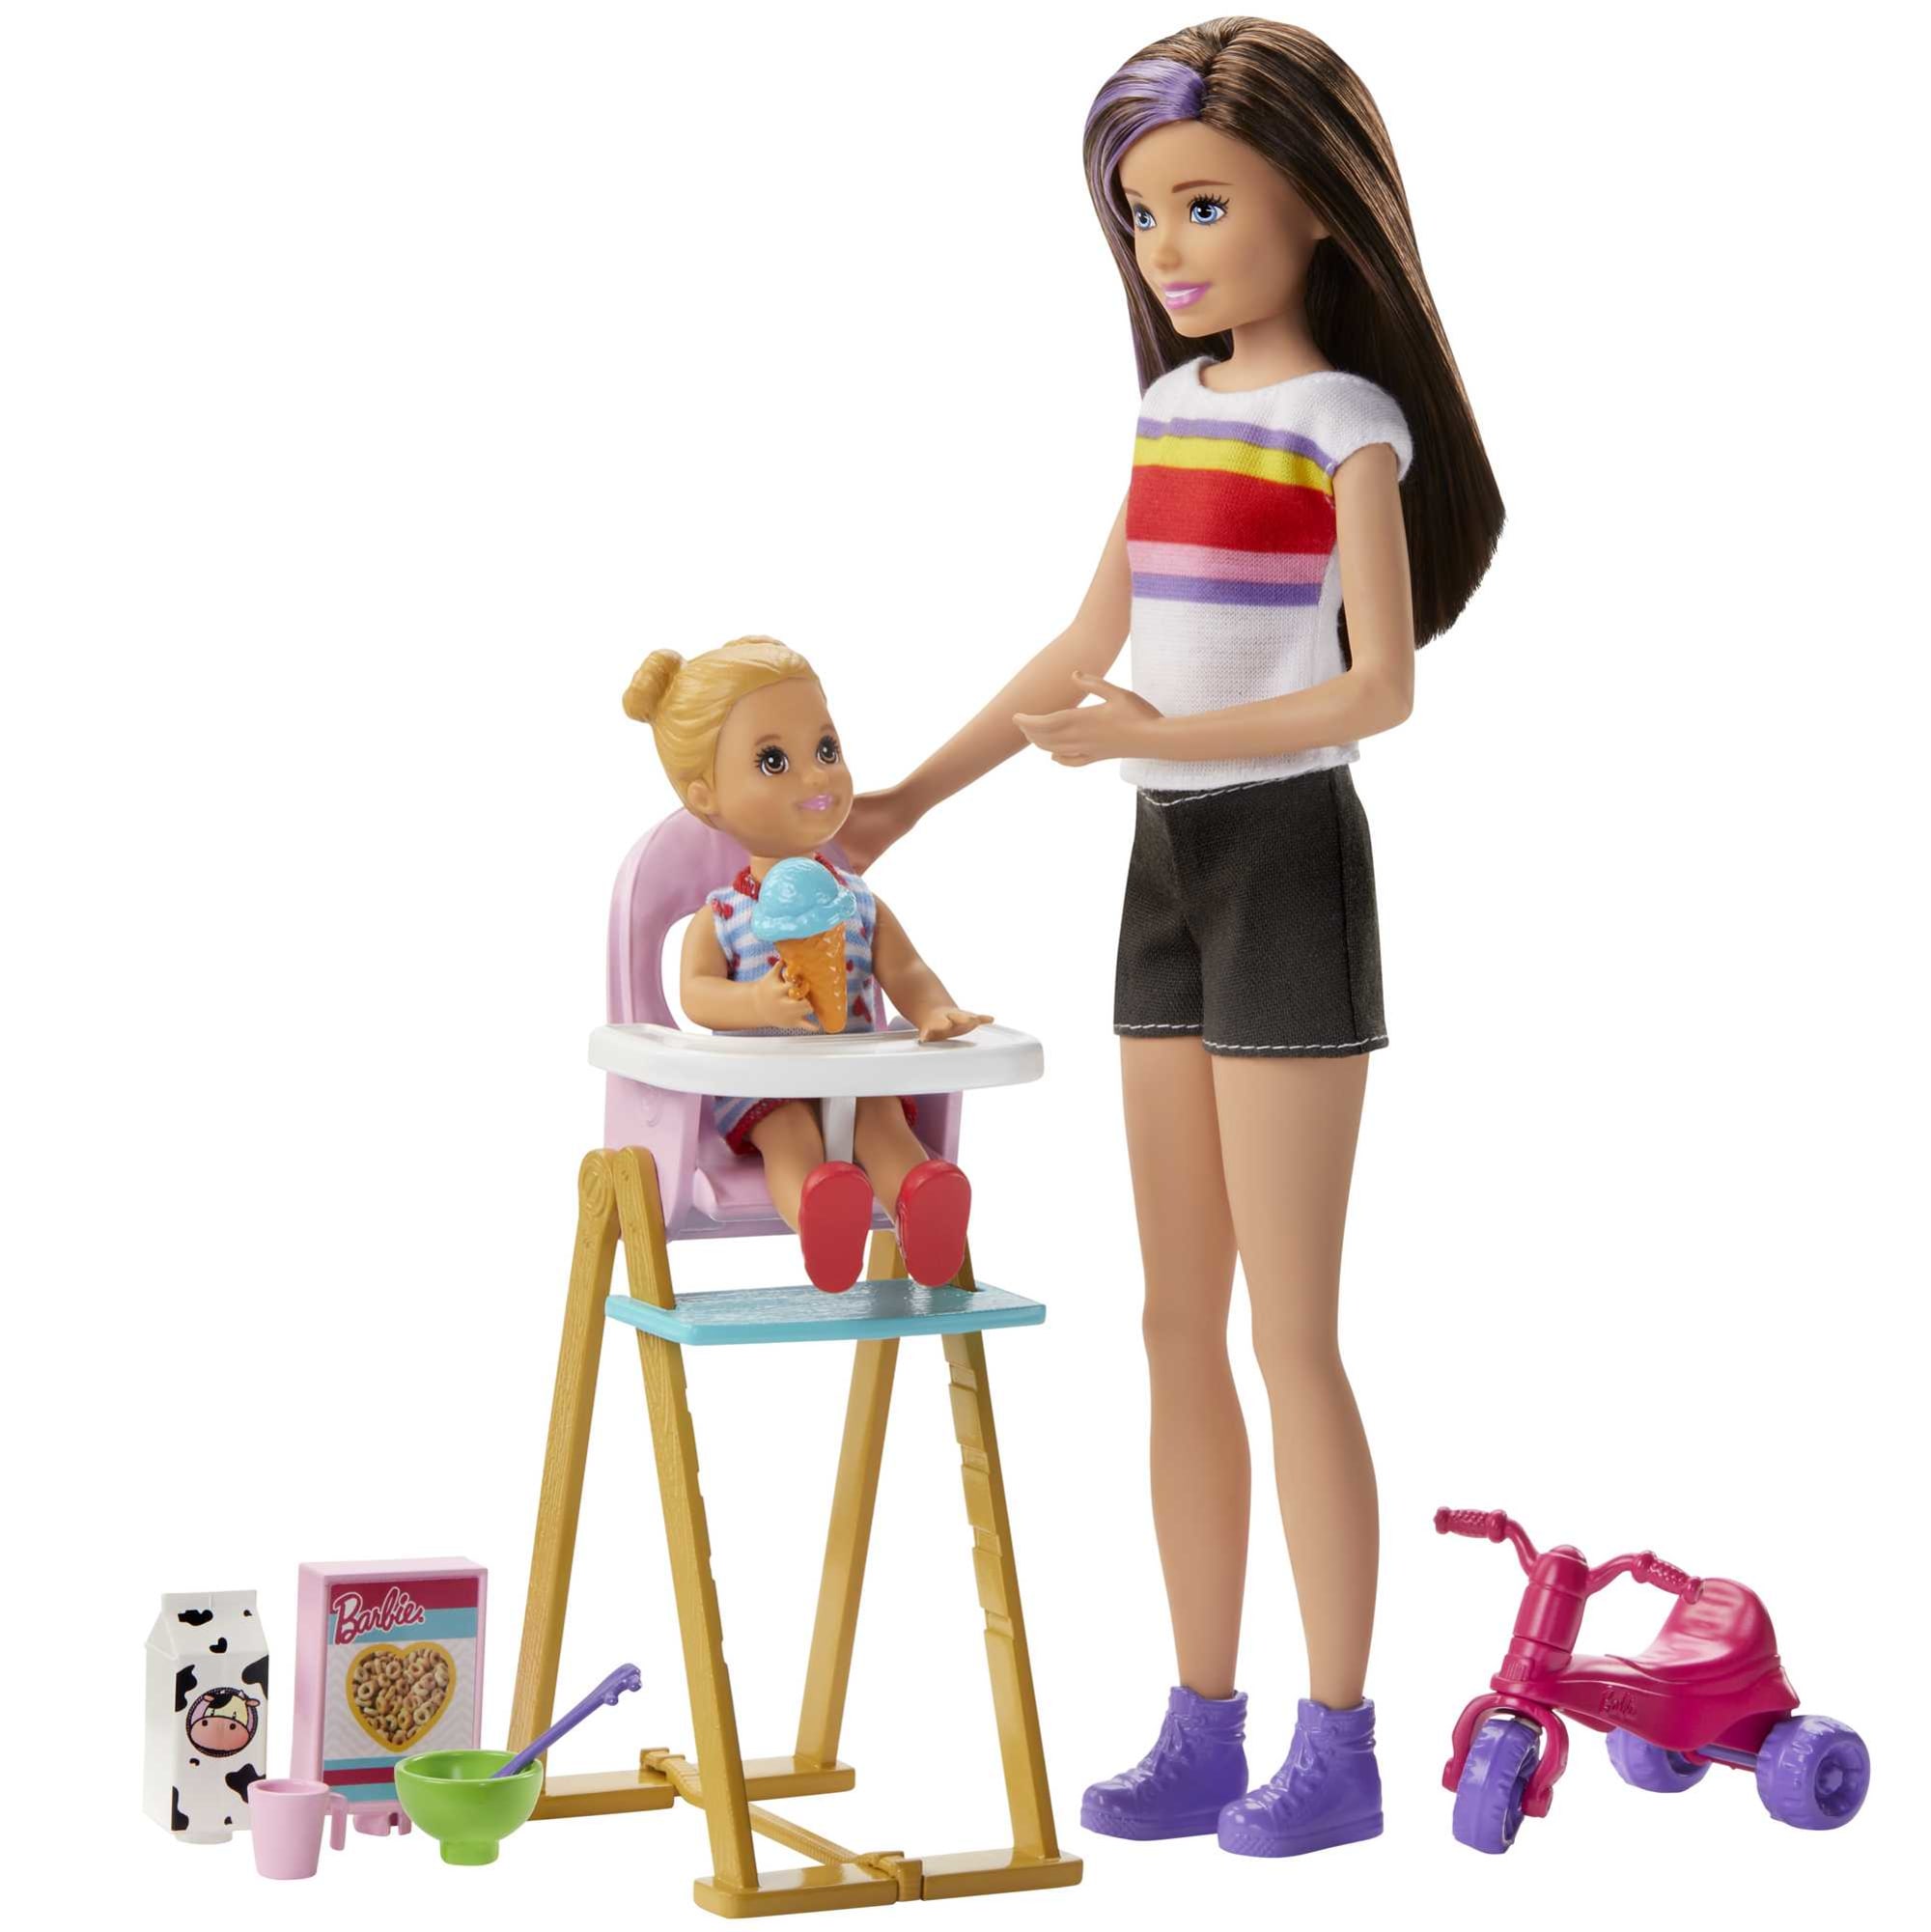 Barbie Babysitters Inc Doll and Accessories | MATTEL